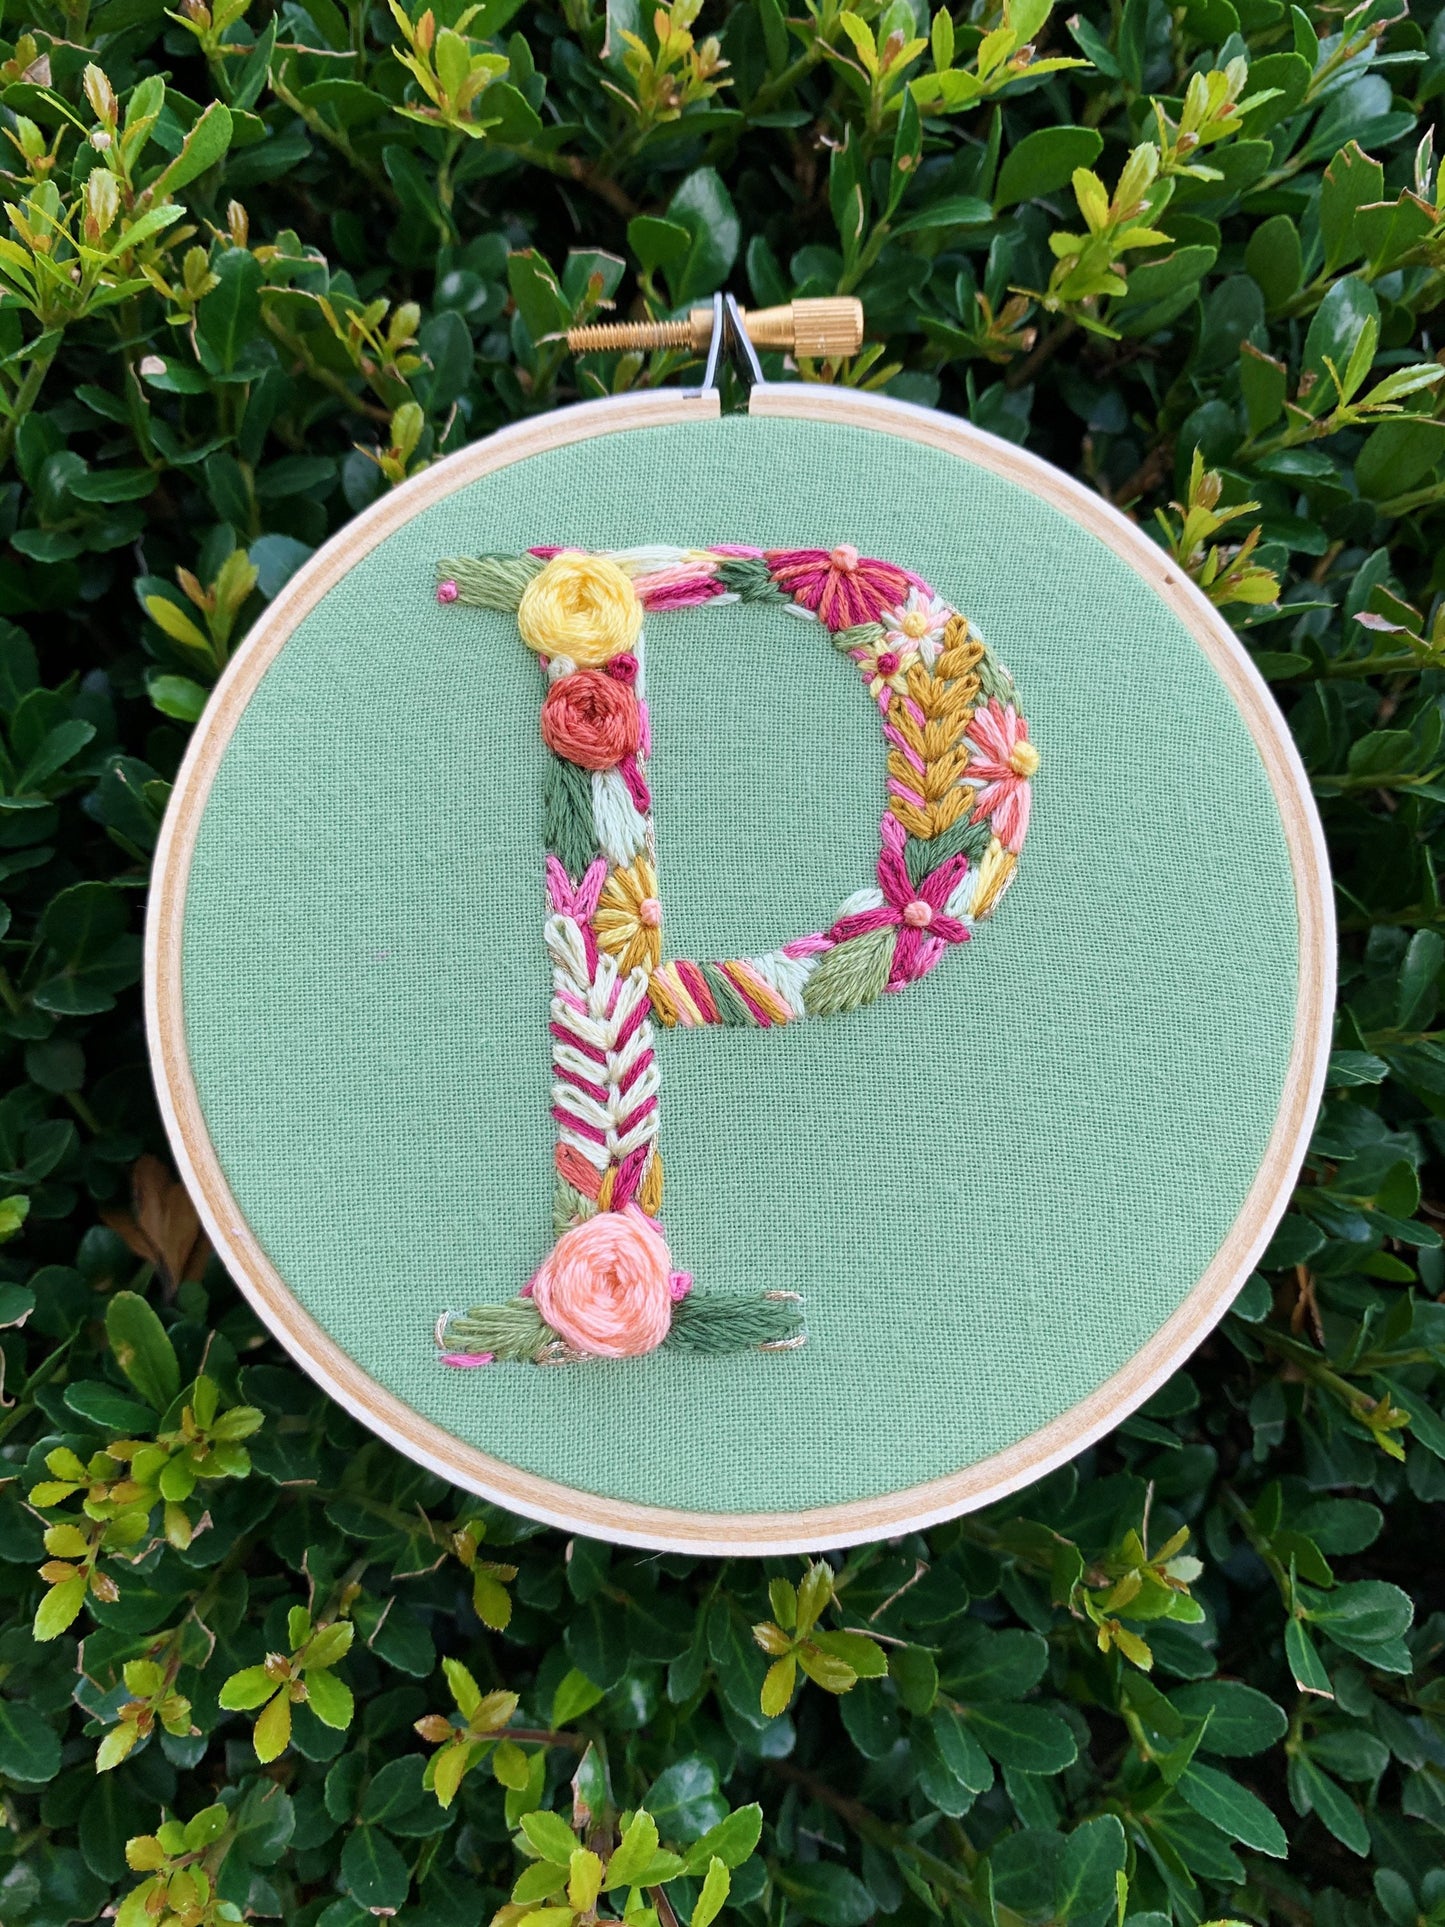 PDF Pattern - Letter P Floral Monogram Embroidery